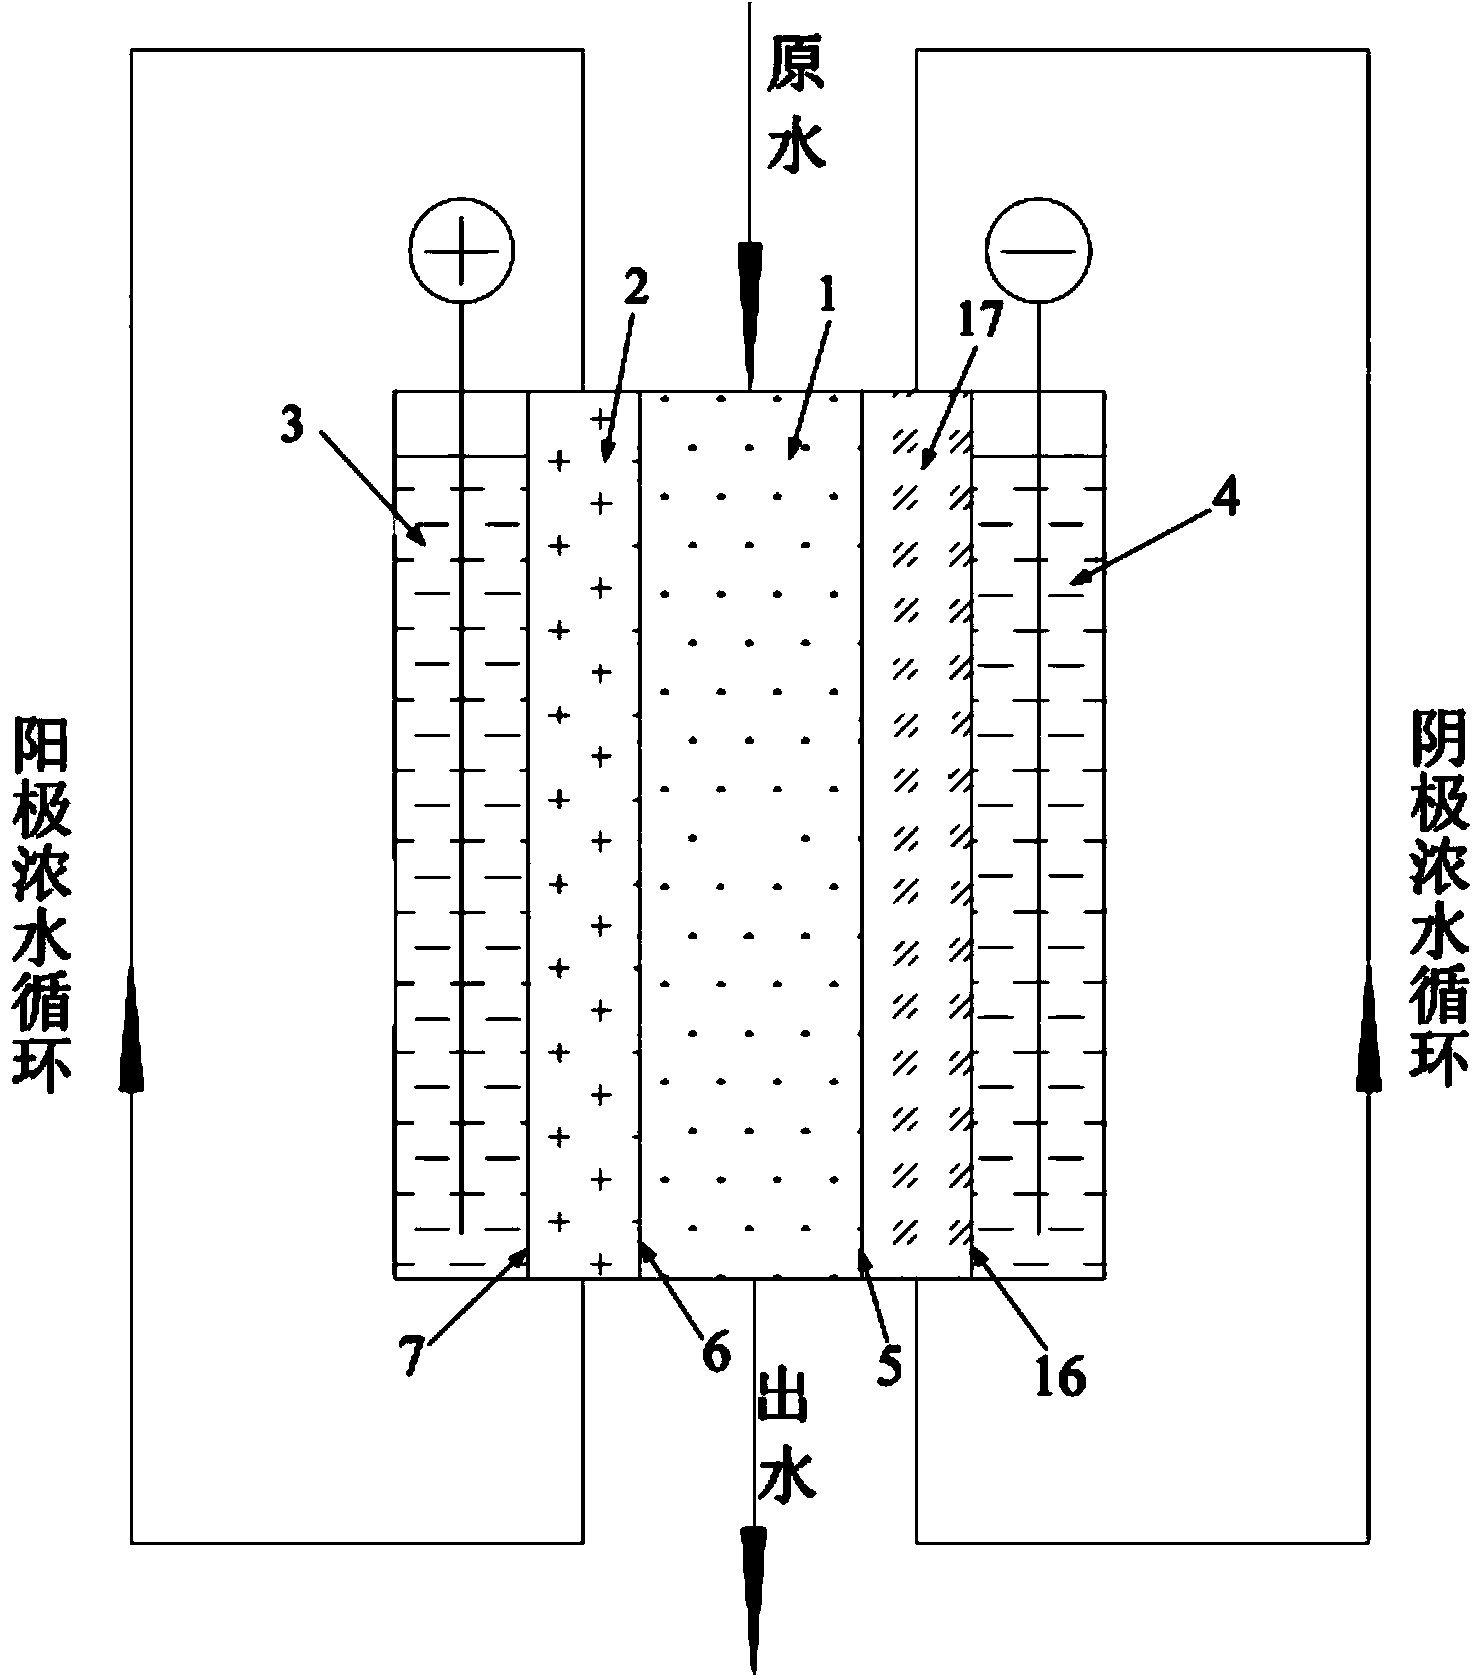 EDI (Electro-deionization) and electro-catalytic integrated reactor and method for removing nitrate